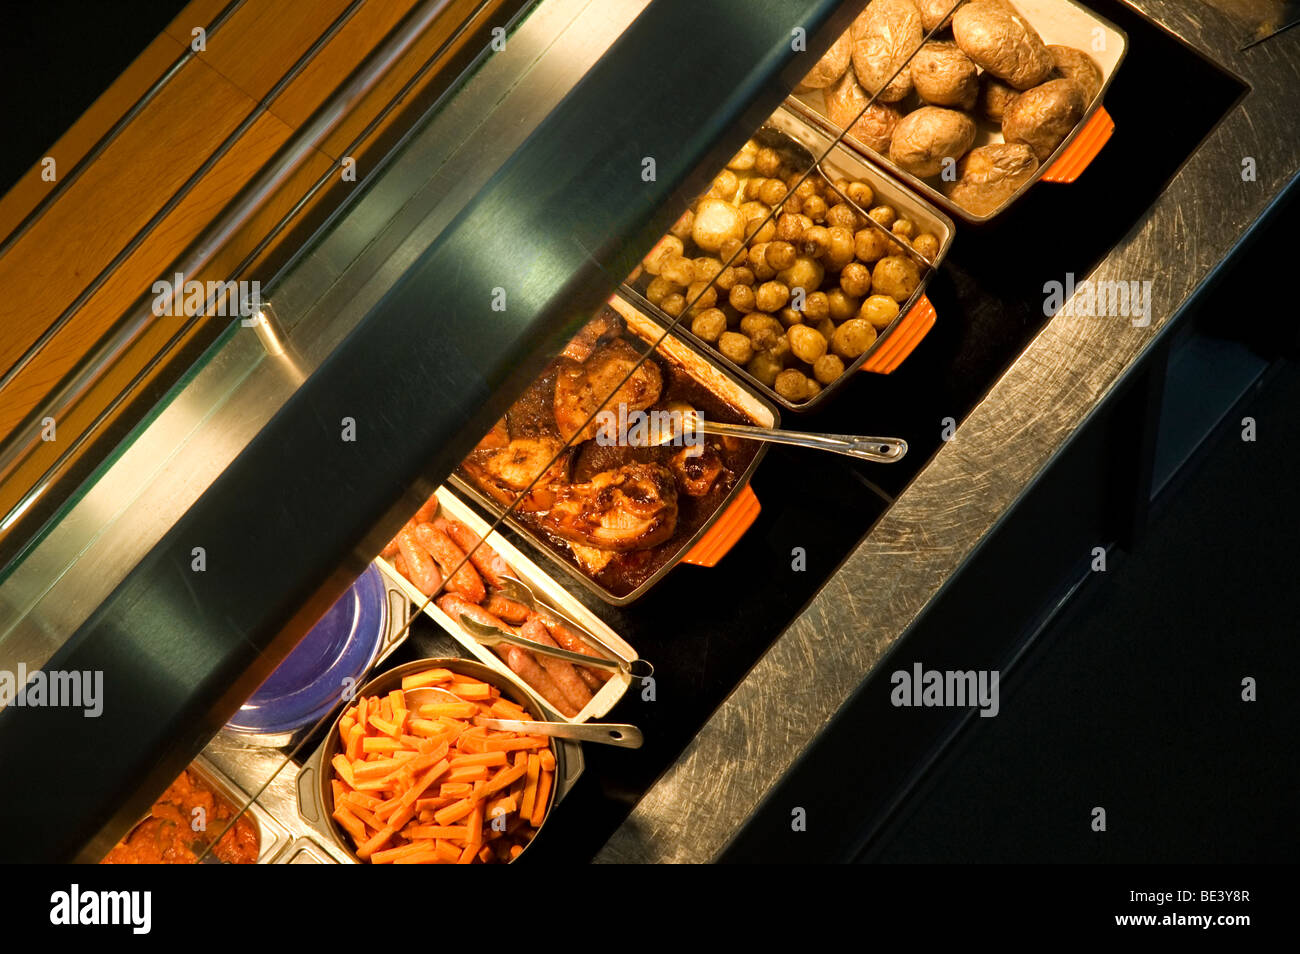 Food in a cafeteria hot counter Stock Photo